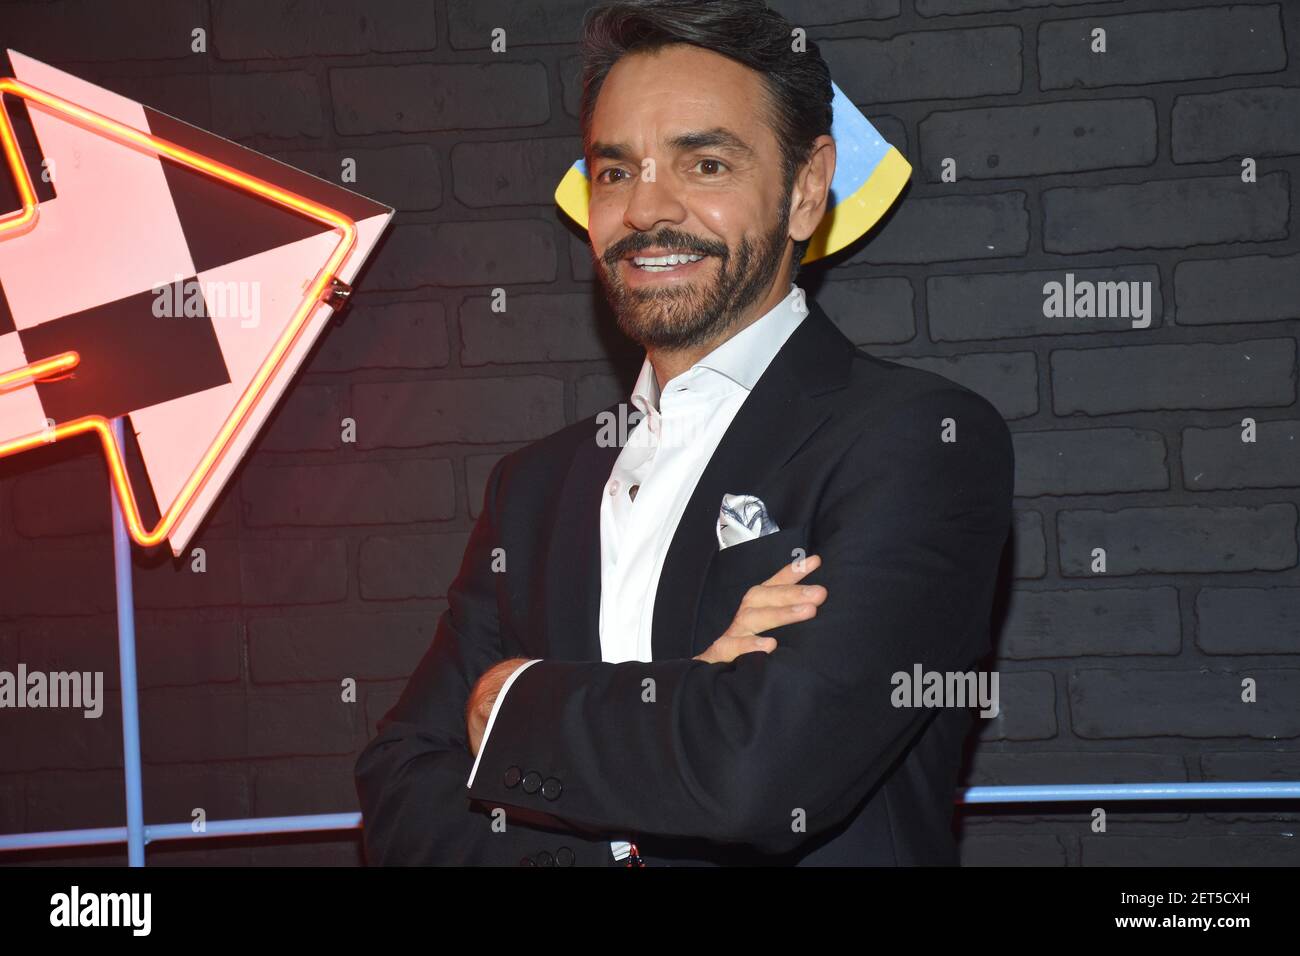 Actor Eugenio Derbez attends at 'LOL: Last One Laughing' by  prime  Video red carpet at Tanganica 67 Forum on December 04, 2018 in Mexico City,  Mexico (Photo by Carlos Tischler/Sipa USA